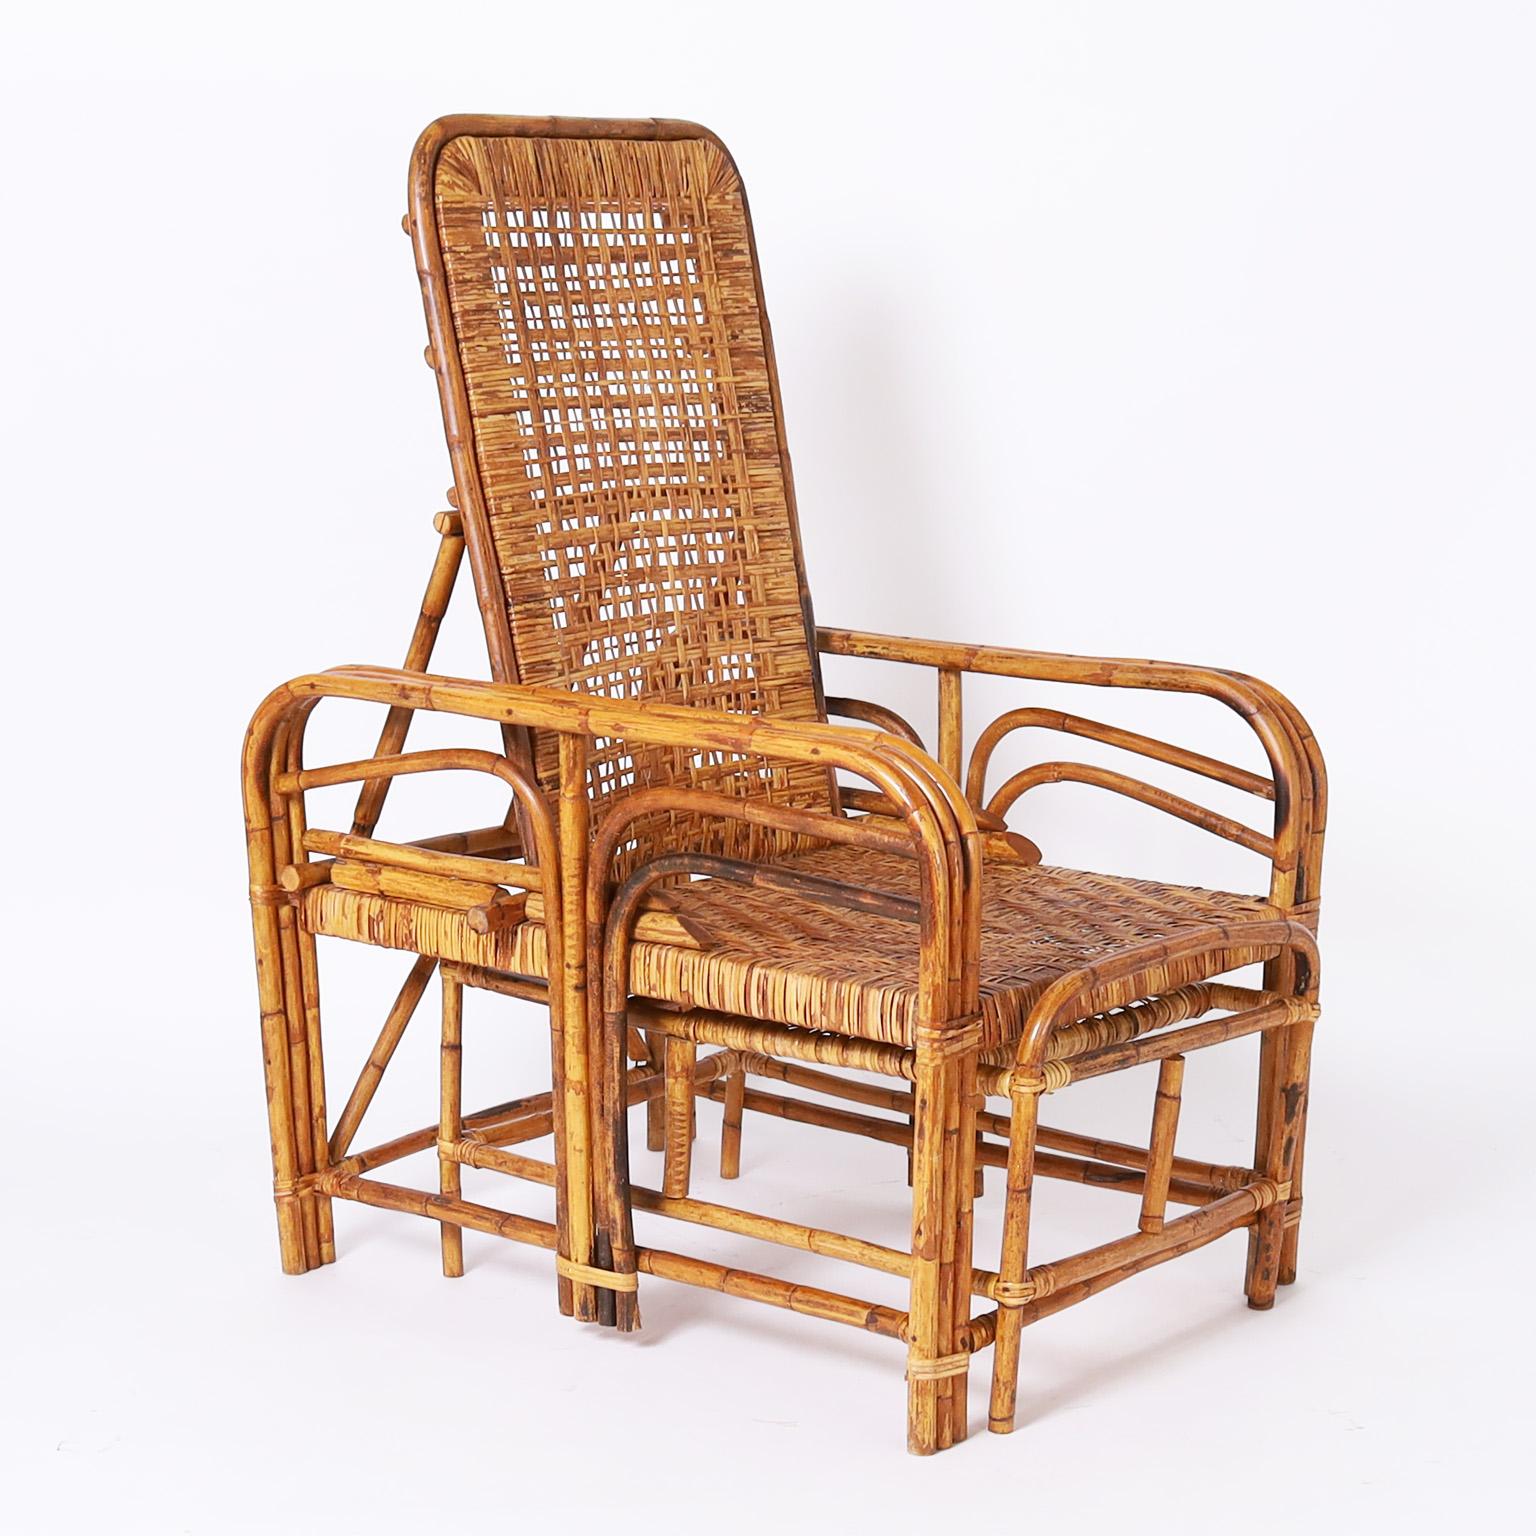 Mid century recliner chair crafted in bamboo and bent bamboo with caned seating featuring a pull out ottoman and Morris style reclining back.

Extended depth 75